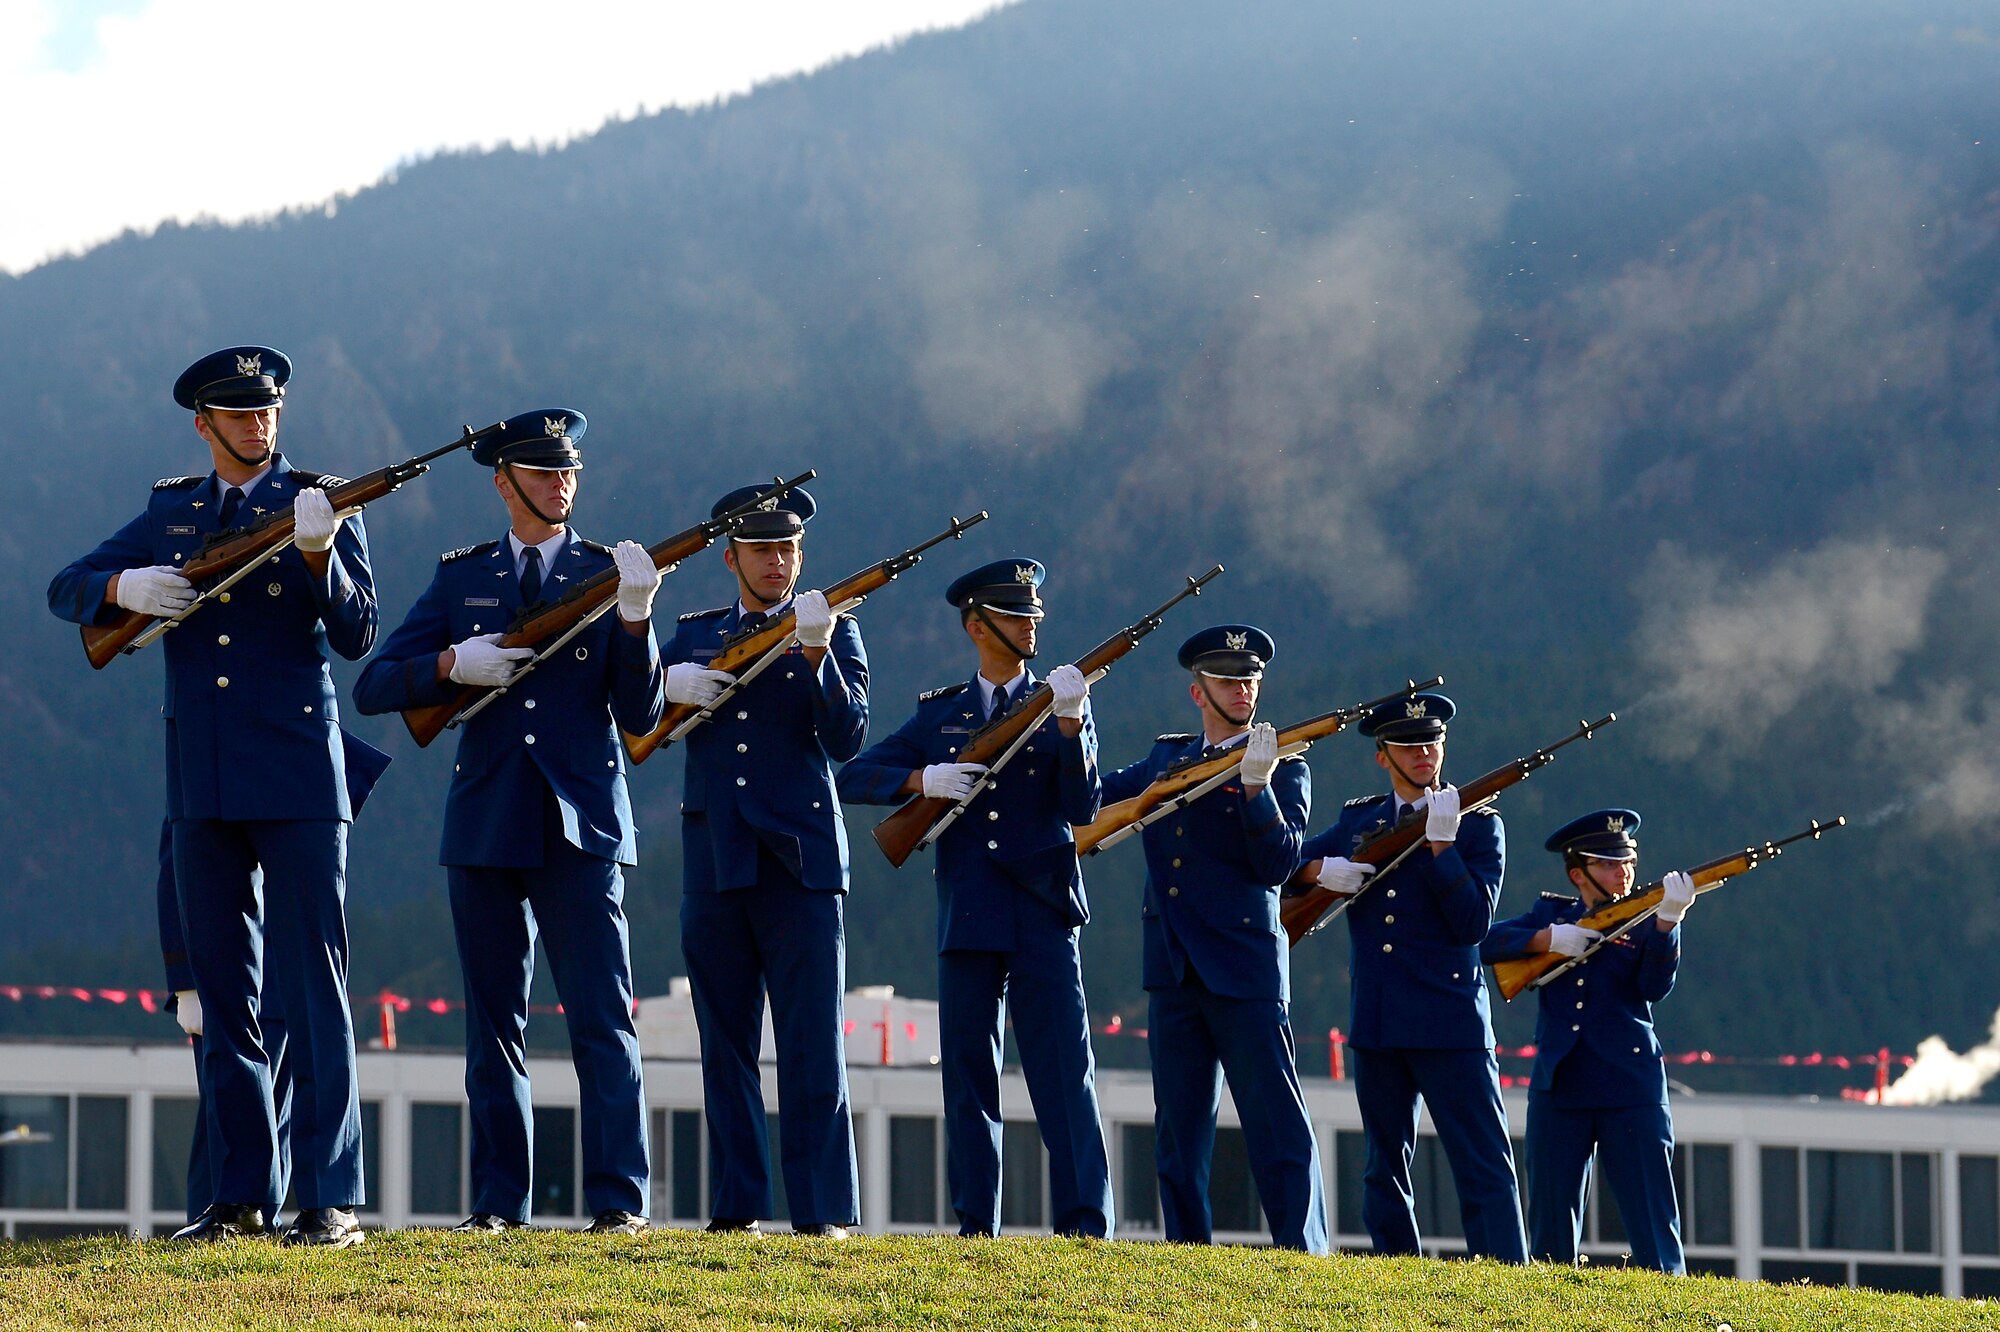 The Cadet Wing honors graduates that passed during this last year during a Homecoming Memorial Ceremony on September 28, 2018, at the U.S. Air Force Academy in Colorado Springs, Colo. Cadets recognize fallen alumni by calling out their name and rendering a final salute. (U.S. Air Force photo by Darcie L. Ibidapo)